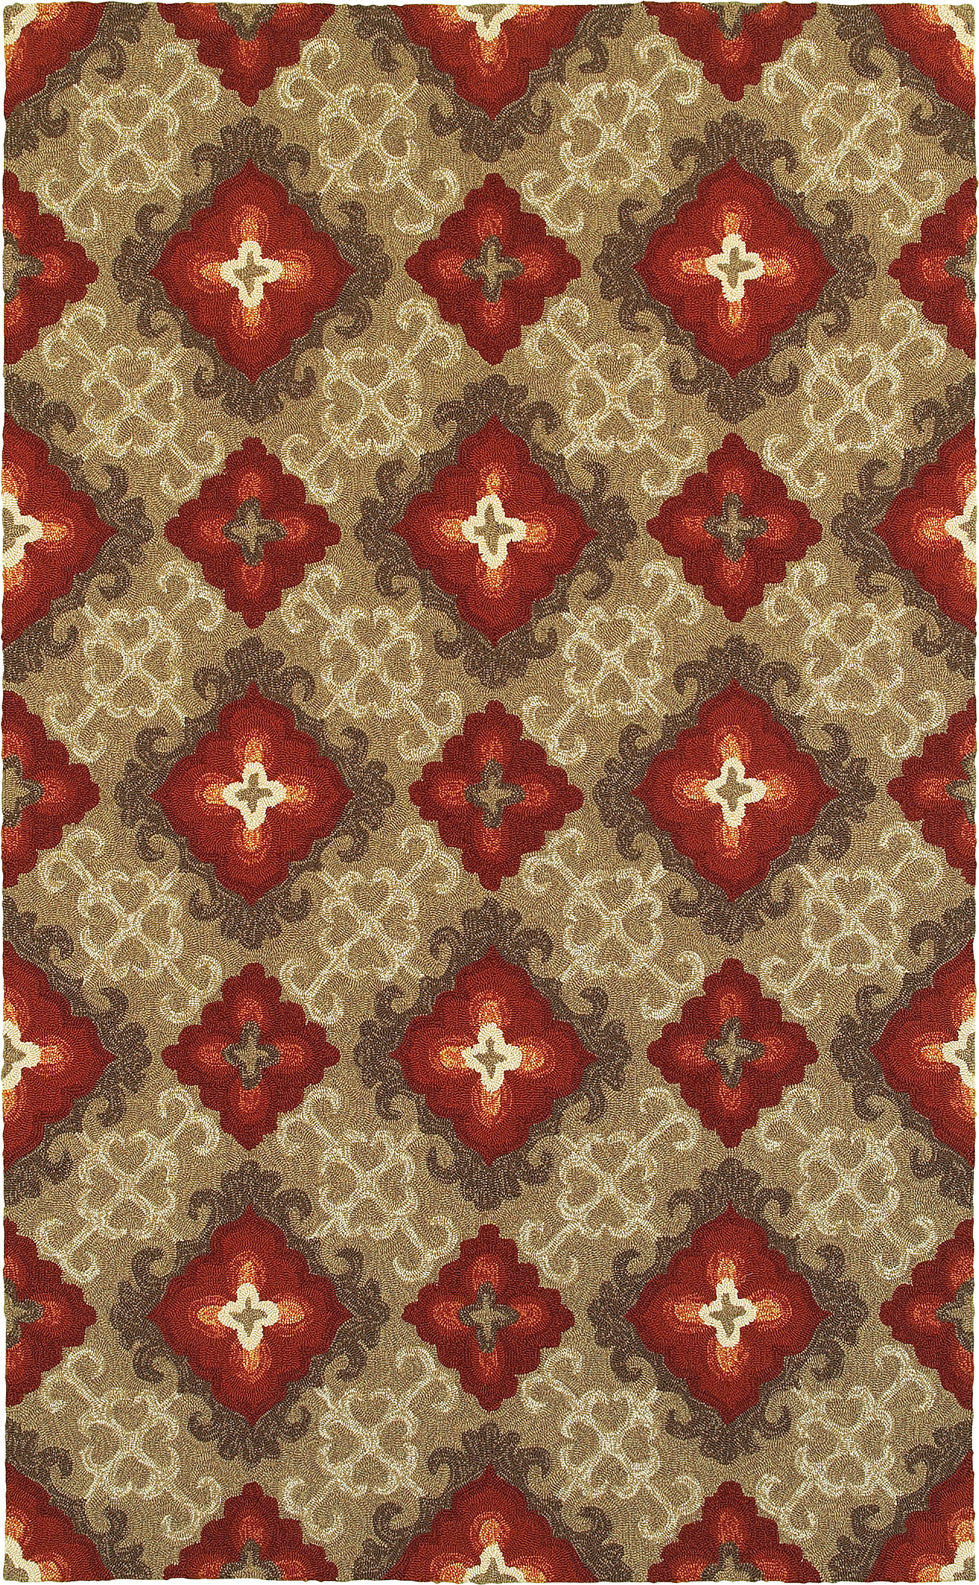 Tommy Bahama Atrium 51109 Brown Area Rug Main Feature